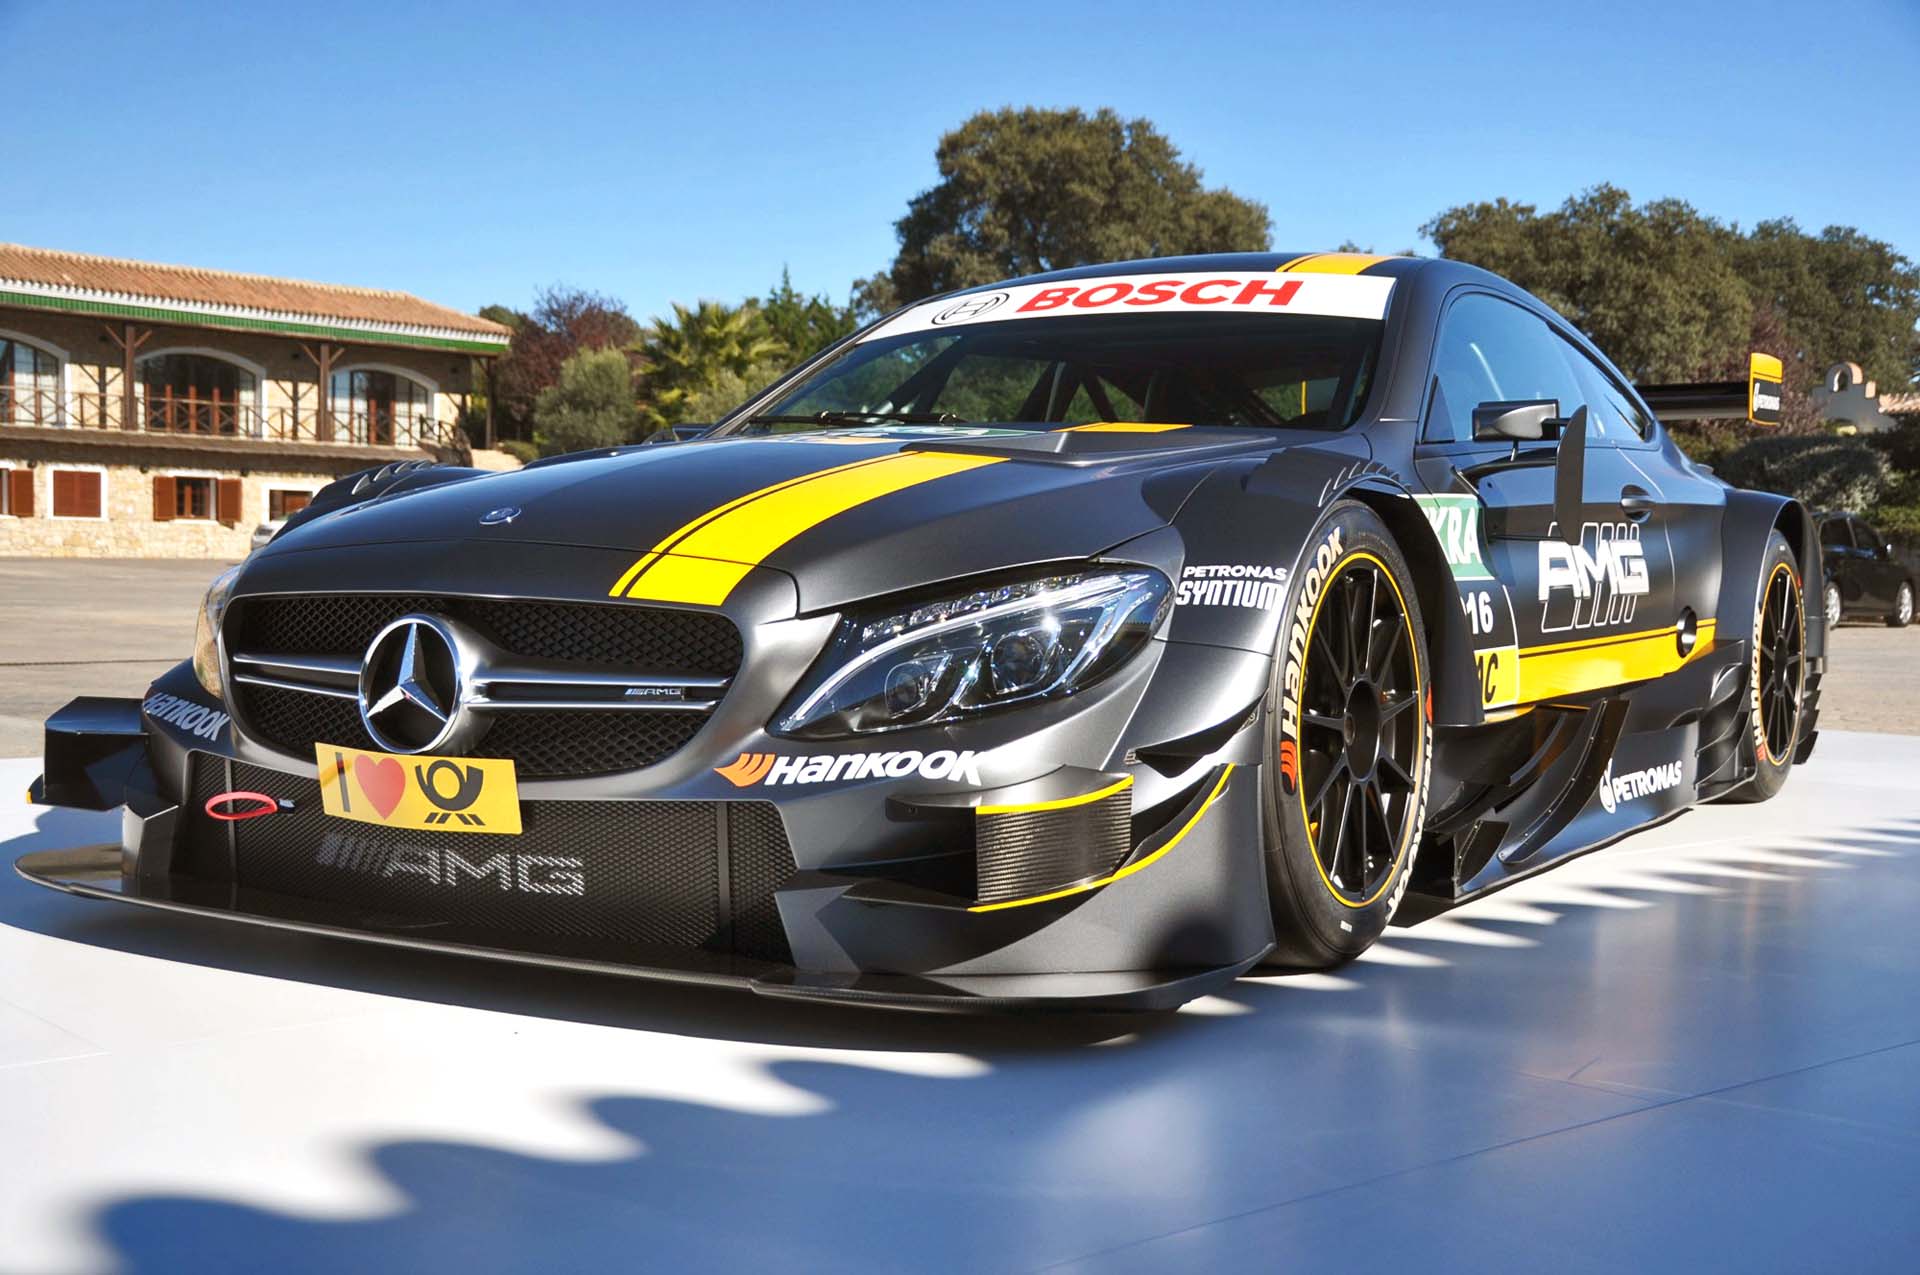 This is the Mercedes-AMG C 63 German Touring Car version, the DTM (Deutche Tourenwagen Masters). Look closely and you can find the lines of the C 63. It's kind of like it's evolved.